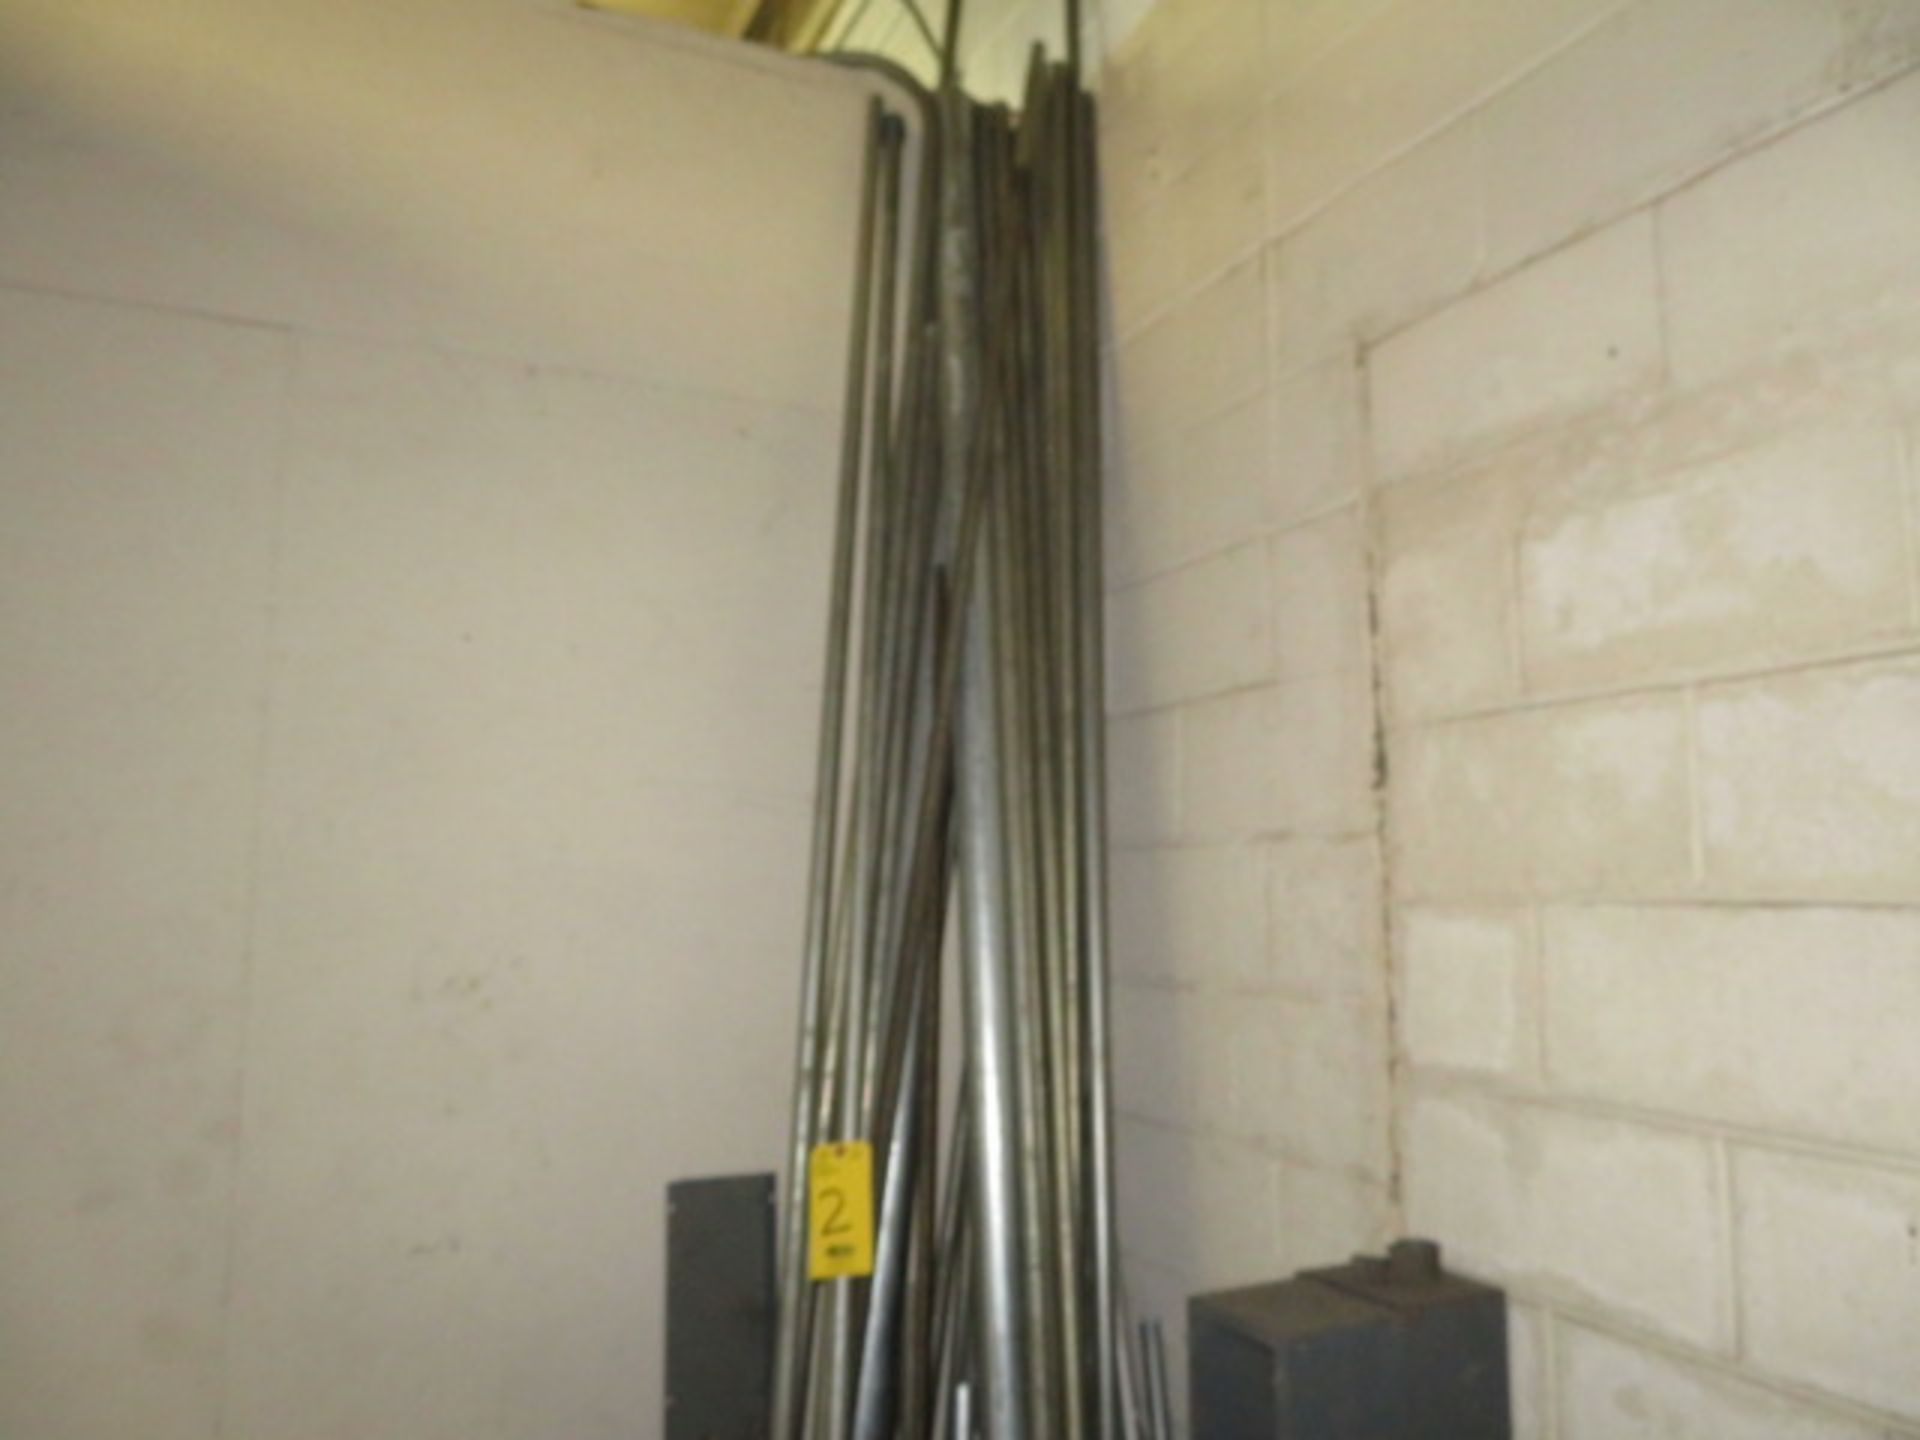 ASSORTED CONDUIT, BOXES AND ELECTRICAL PARTS - Image 2 of 2